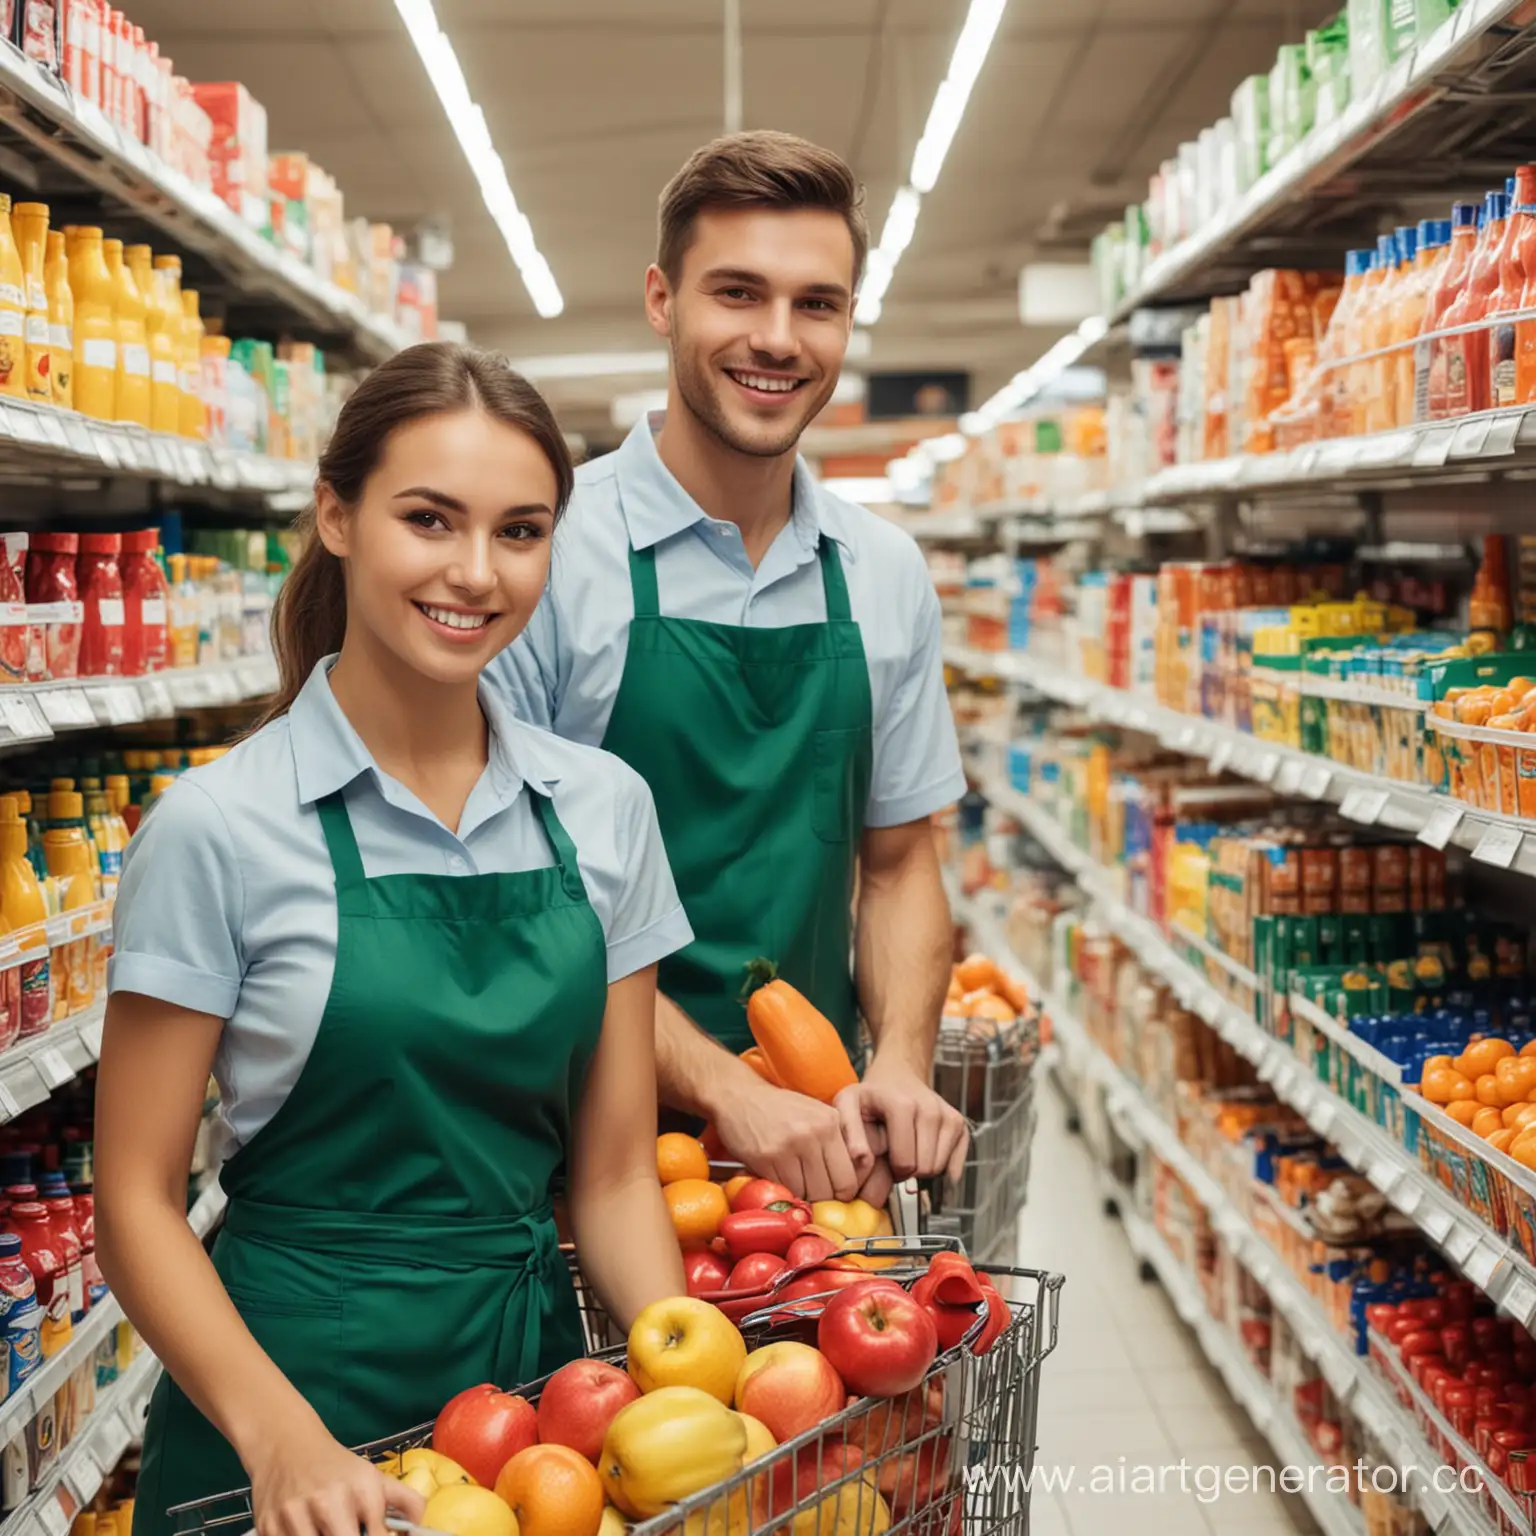 Smiling-Supermarket-Workers-Adult-Man-and-Woman-Positively-Engage-with-Camera